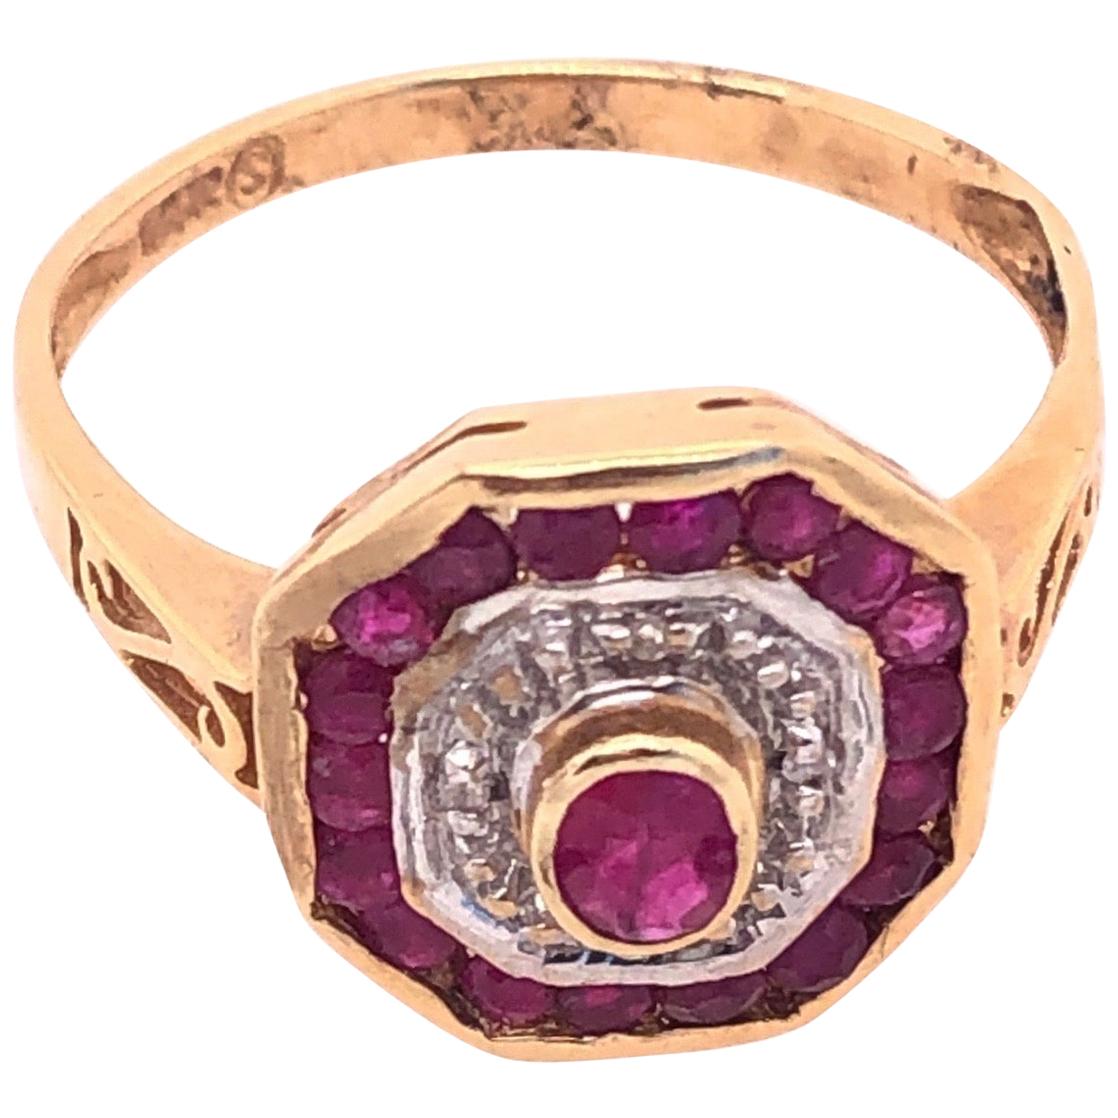 14 Karat Yellow and White Gold Ruby and Diamond Ring with Side Scroll